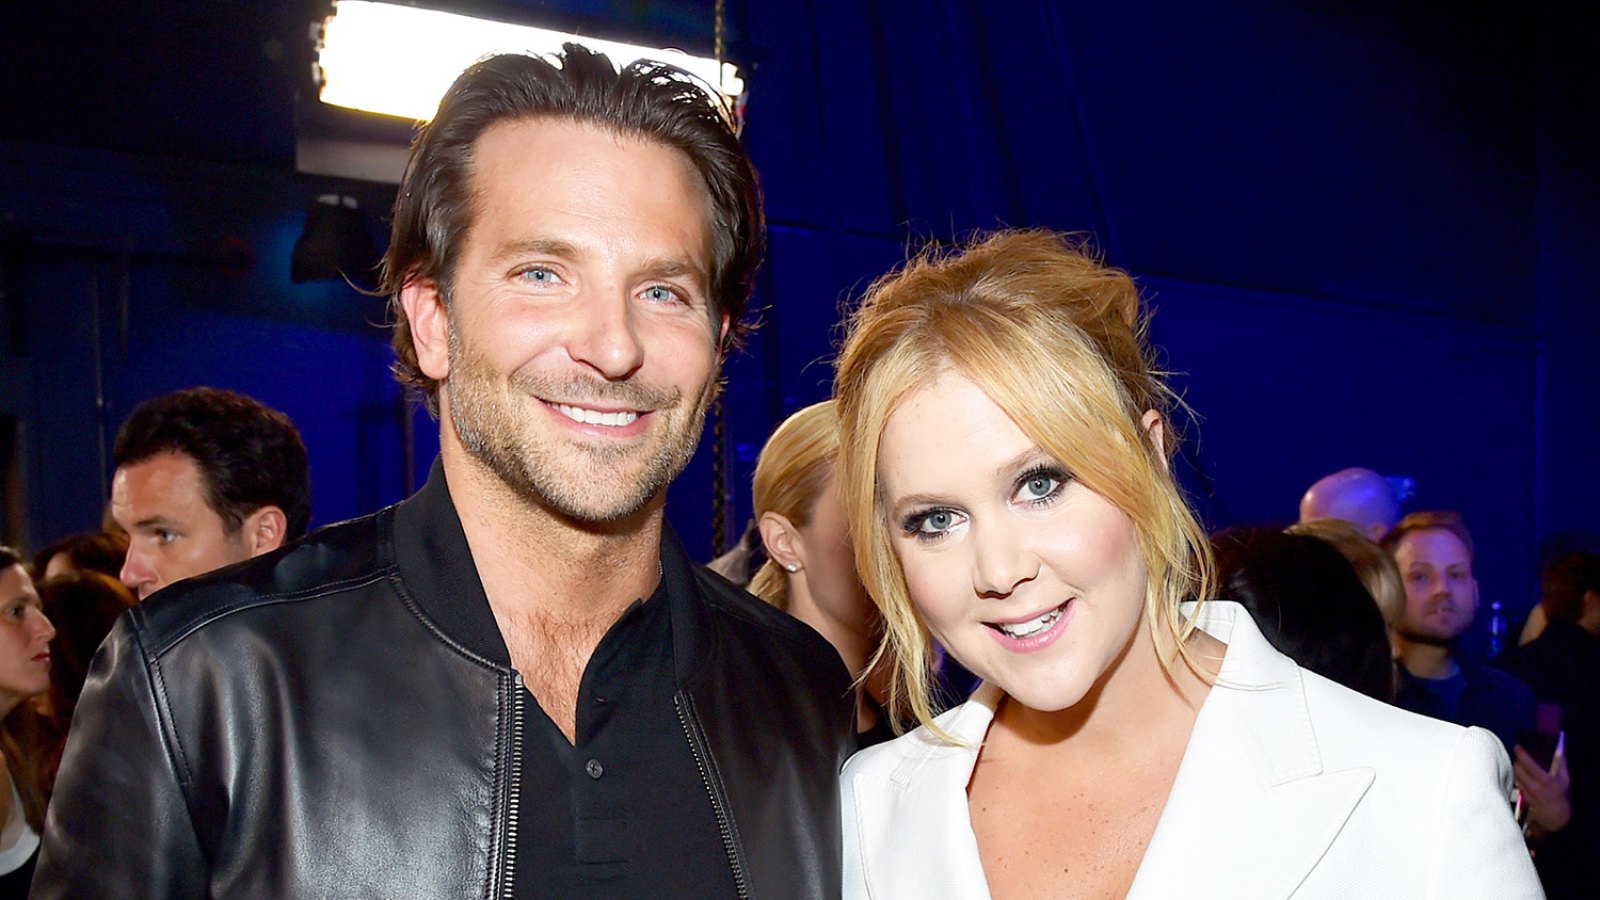 Bradley Cooper and Amy Schumer